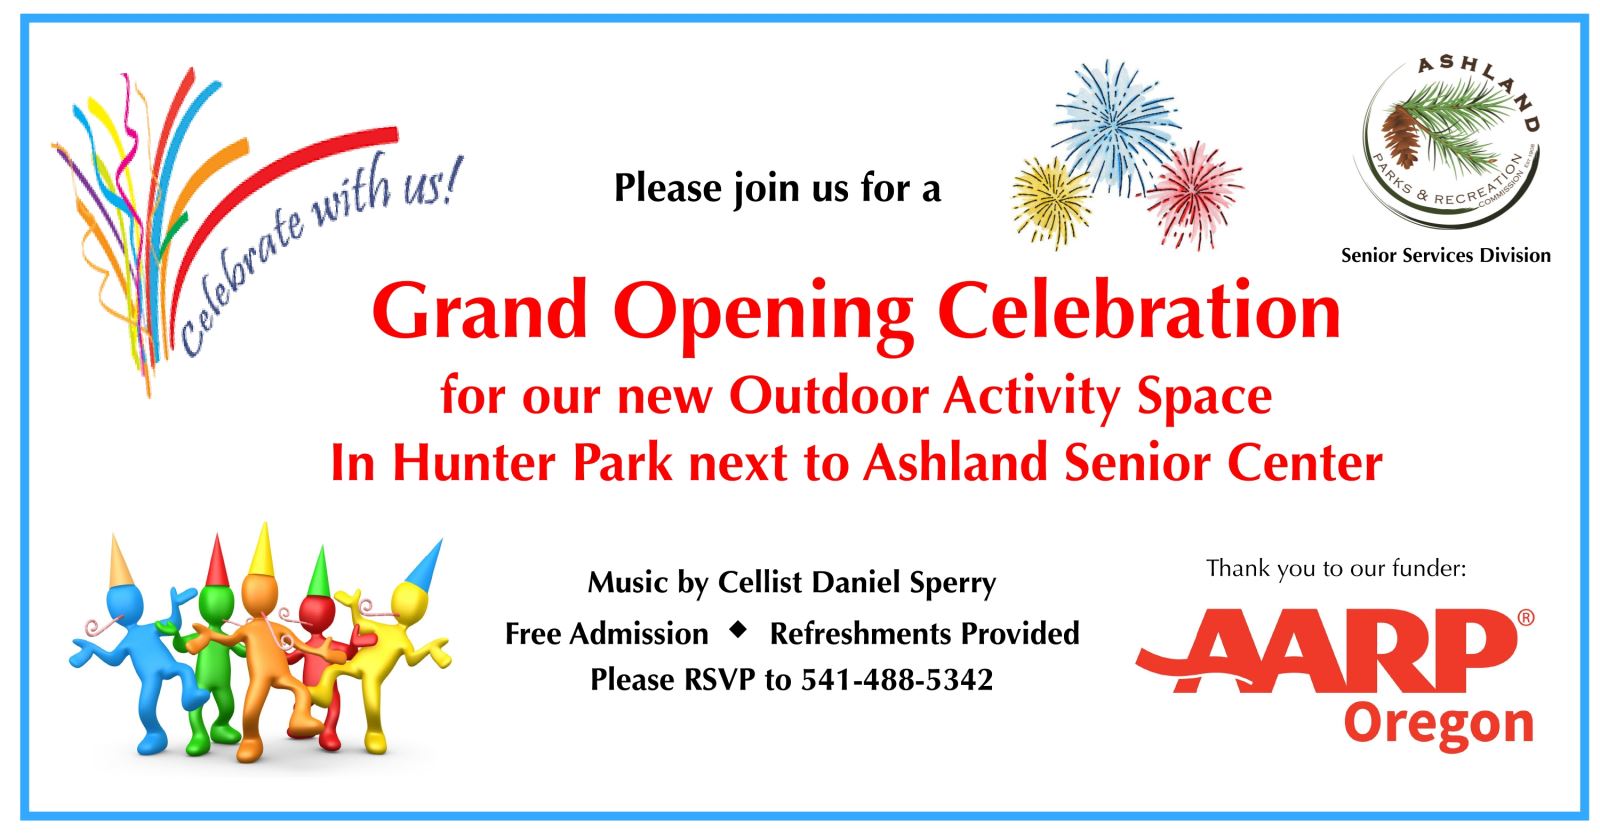 Grand Opening of Outdoor Activity Space at Ashland Senior Center